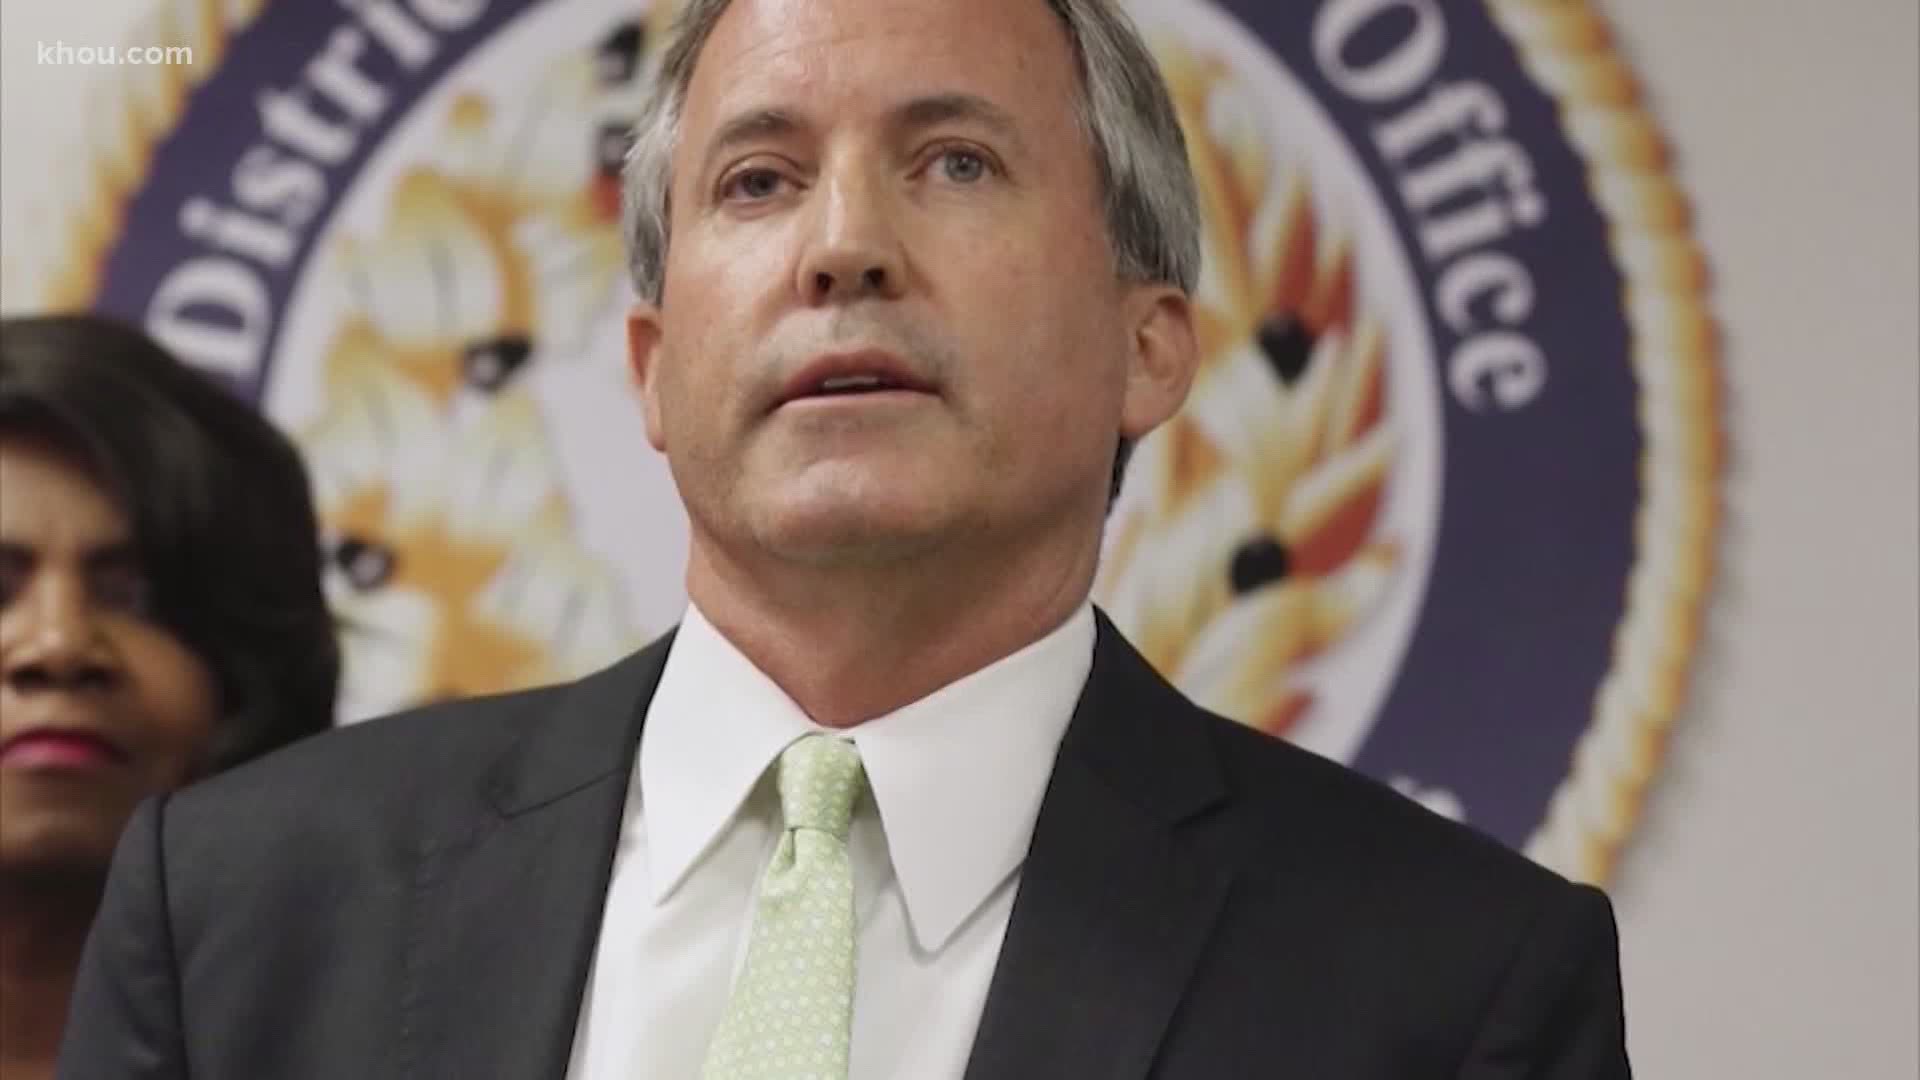 The Supreme Court continues to weigh whether to take up the election lawsuit filed by Texas Attorney General Ken Paxton and also supported by 17 Republican AGs.